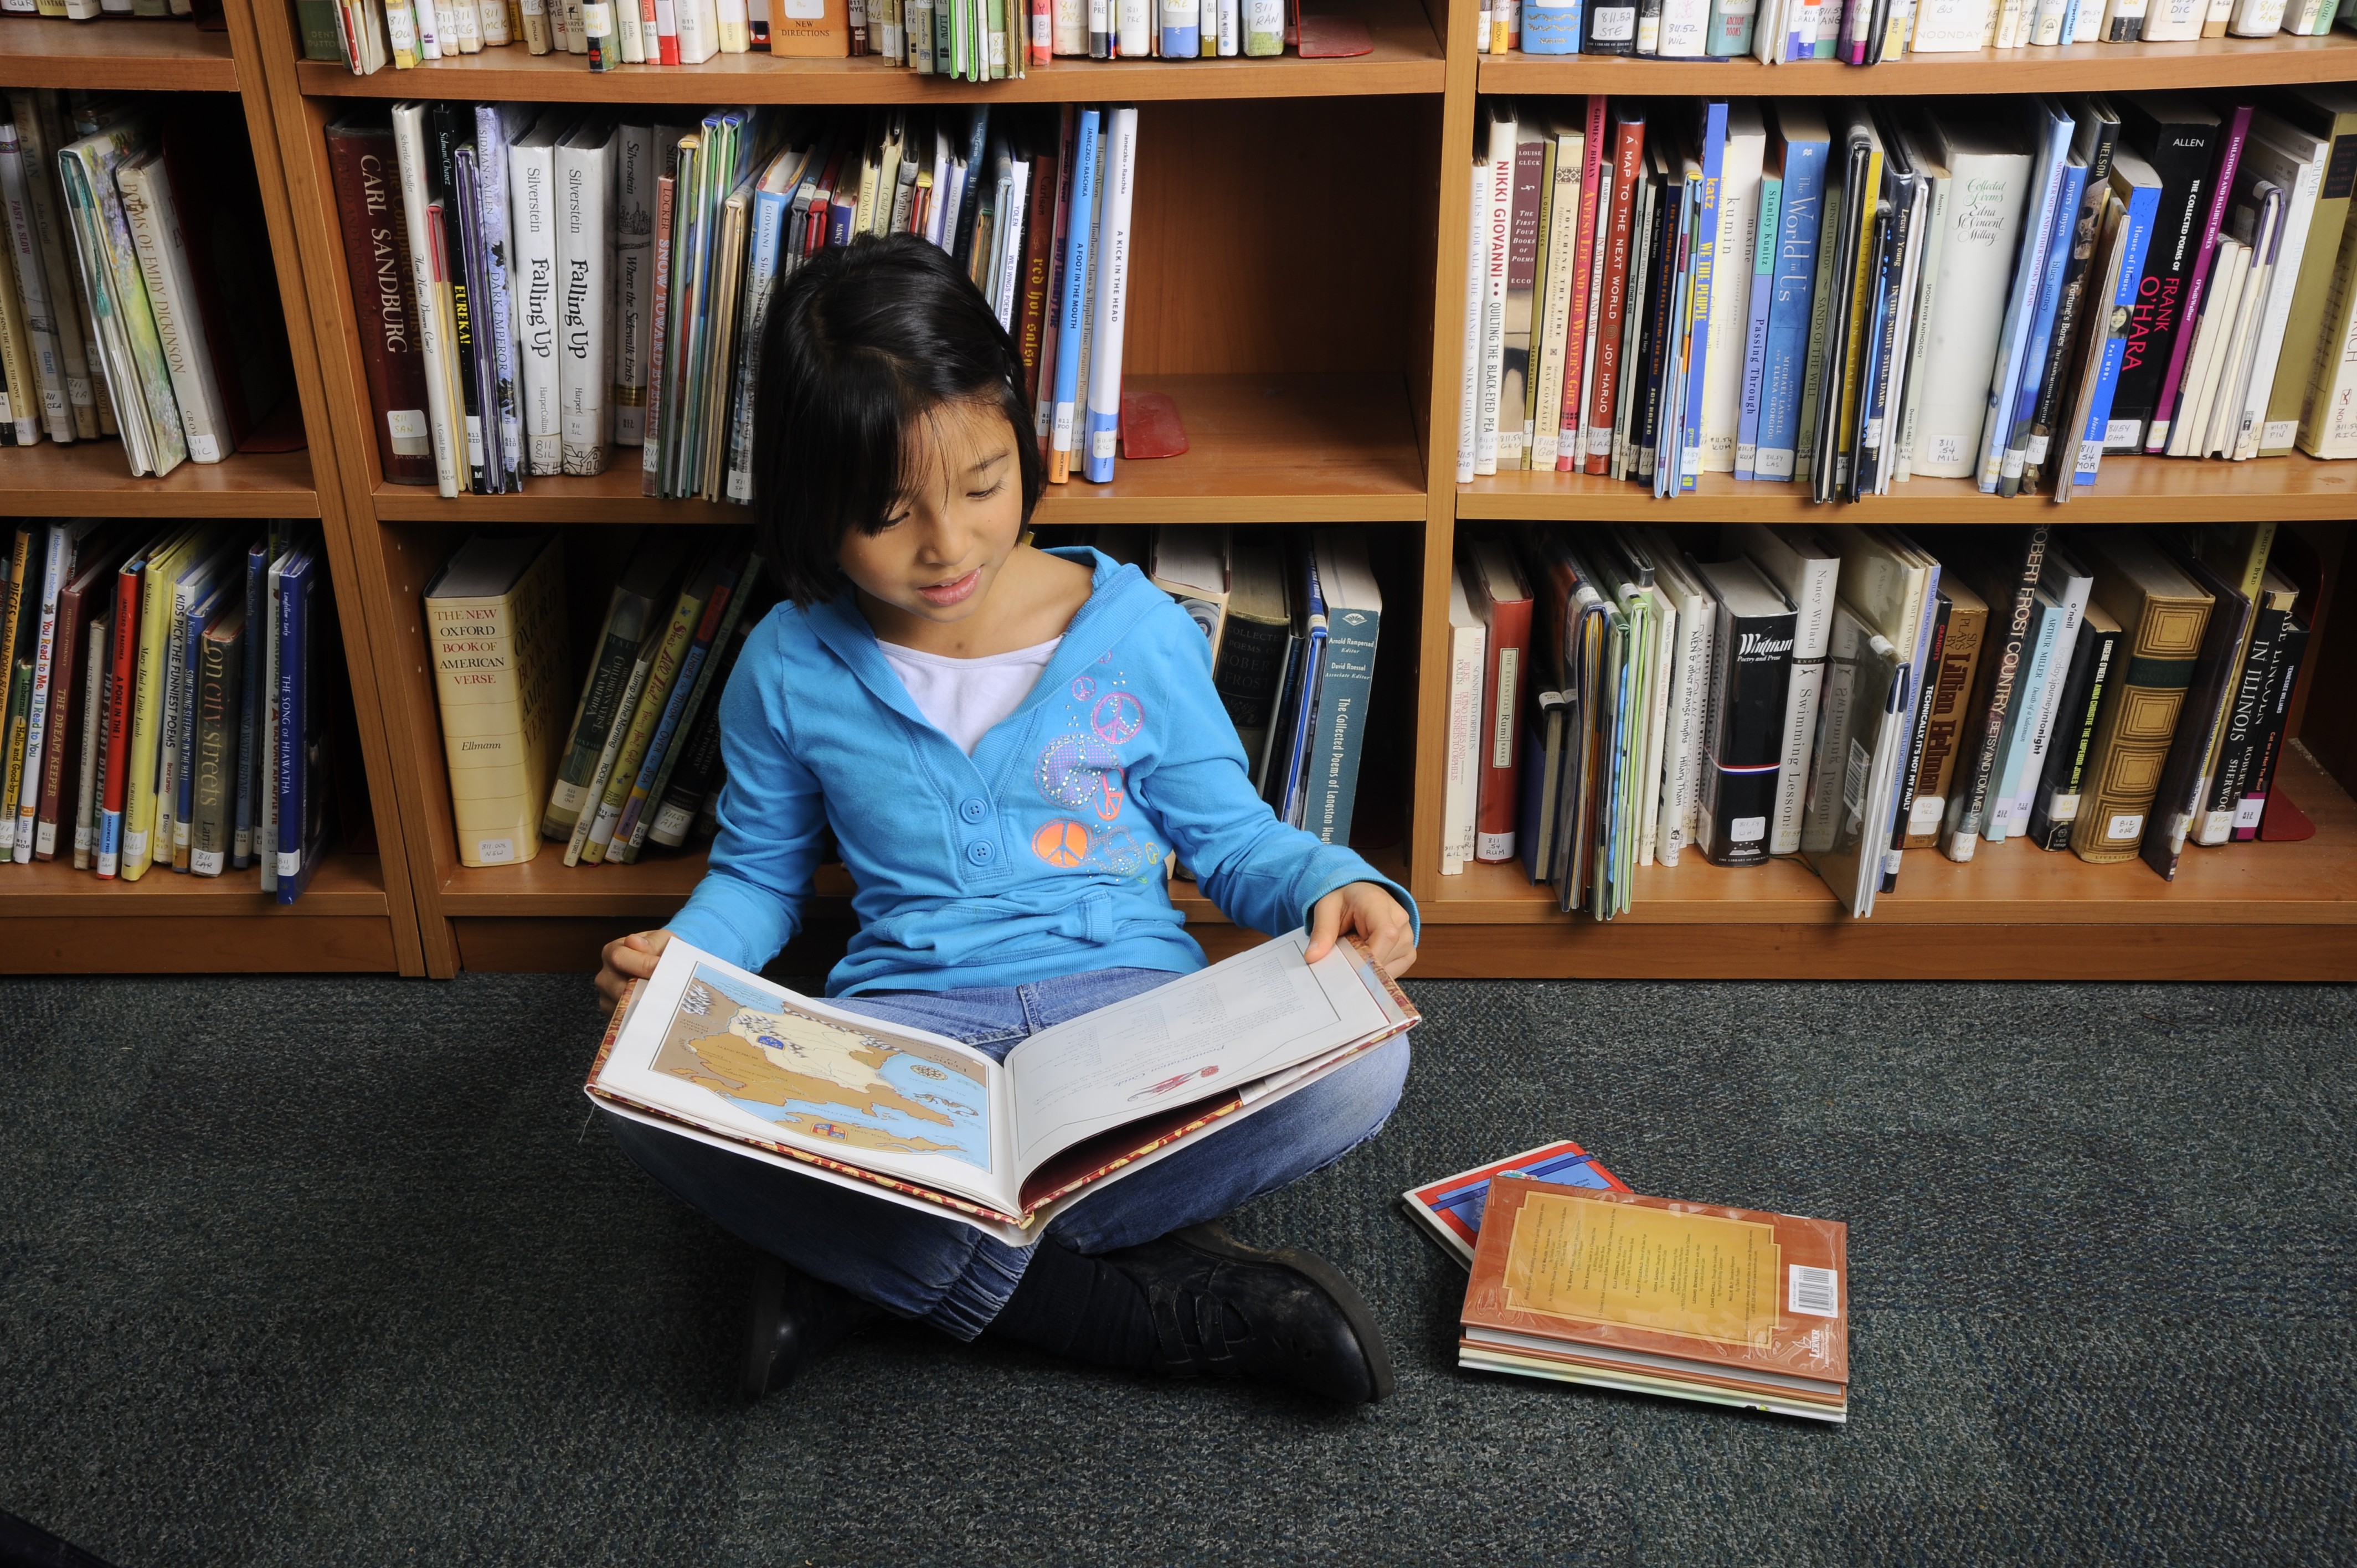 8 year old asian girl looks through books on a shelf in a library. --- Image by © Richard Hutchings/Corbis [01DECEMBER2015 FEATURES LIFE]